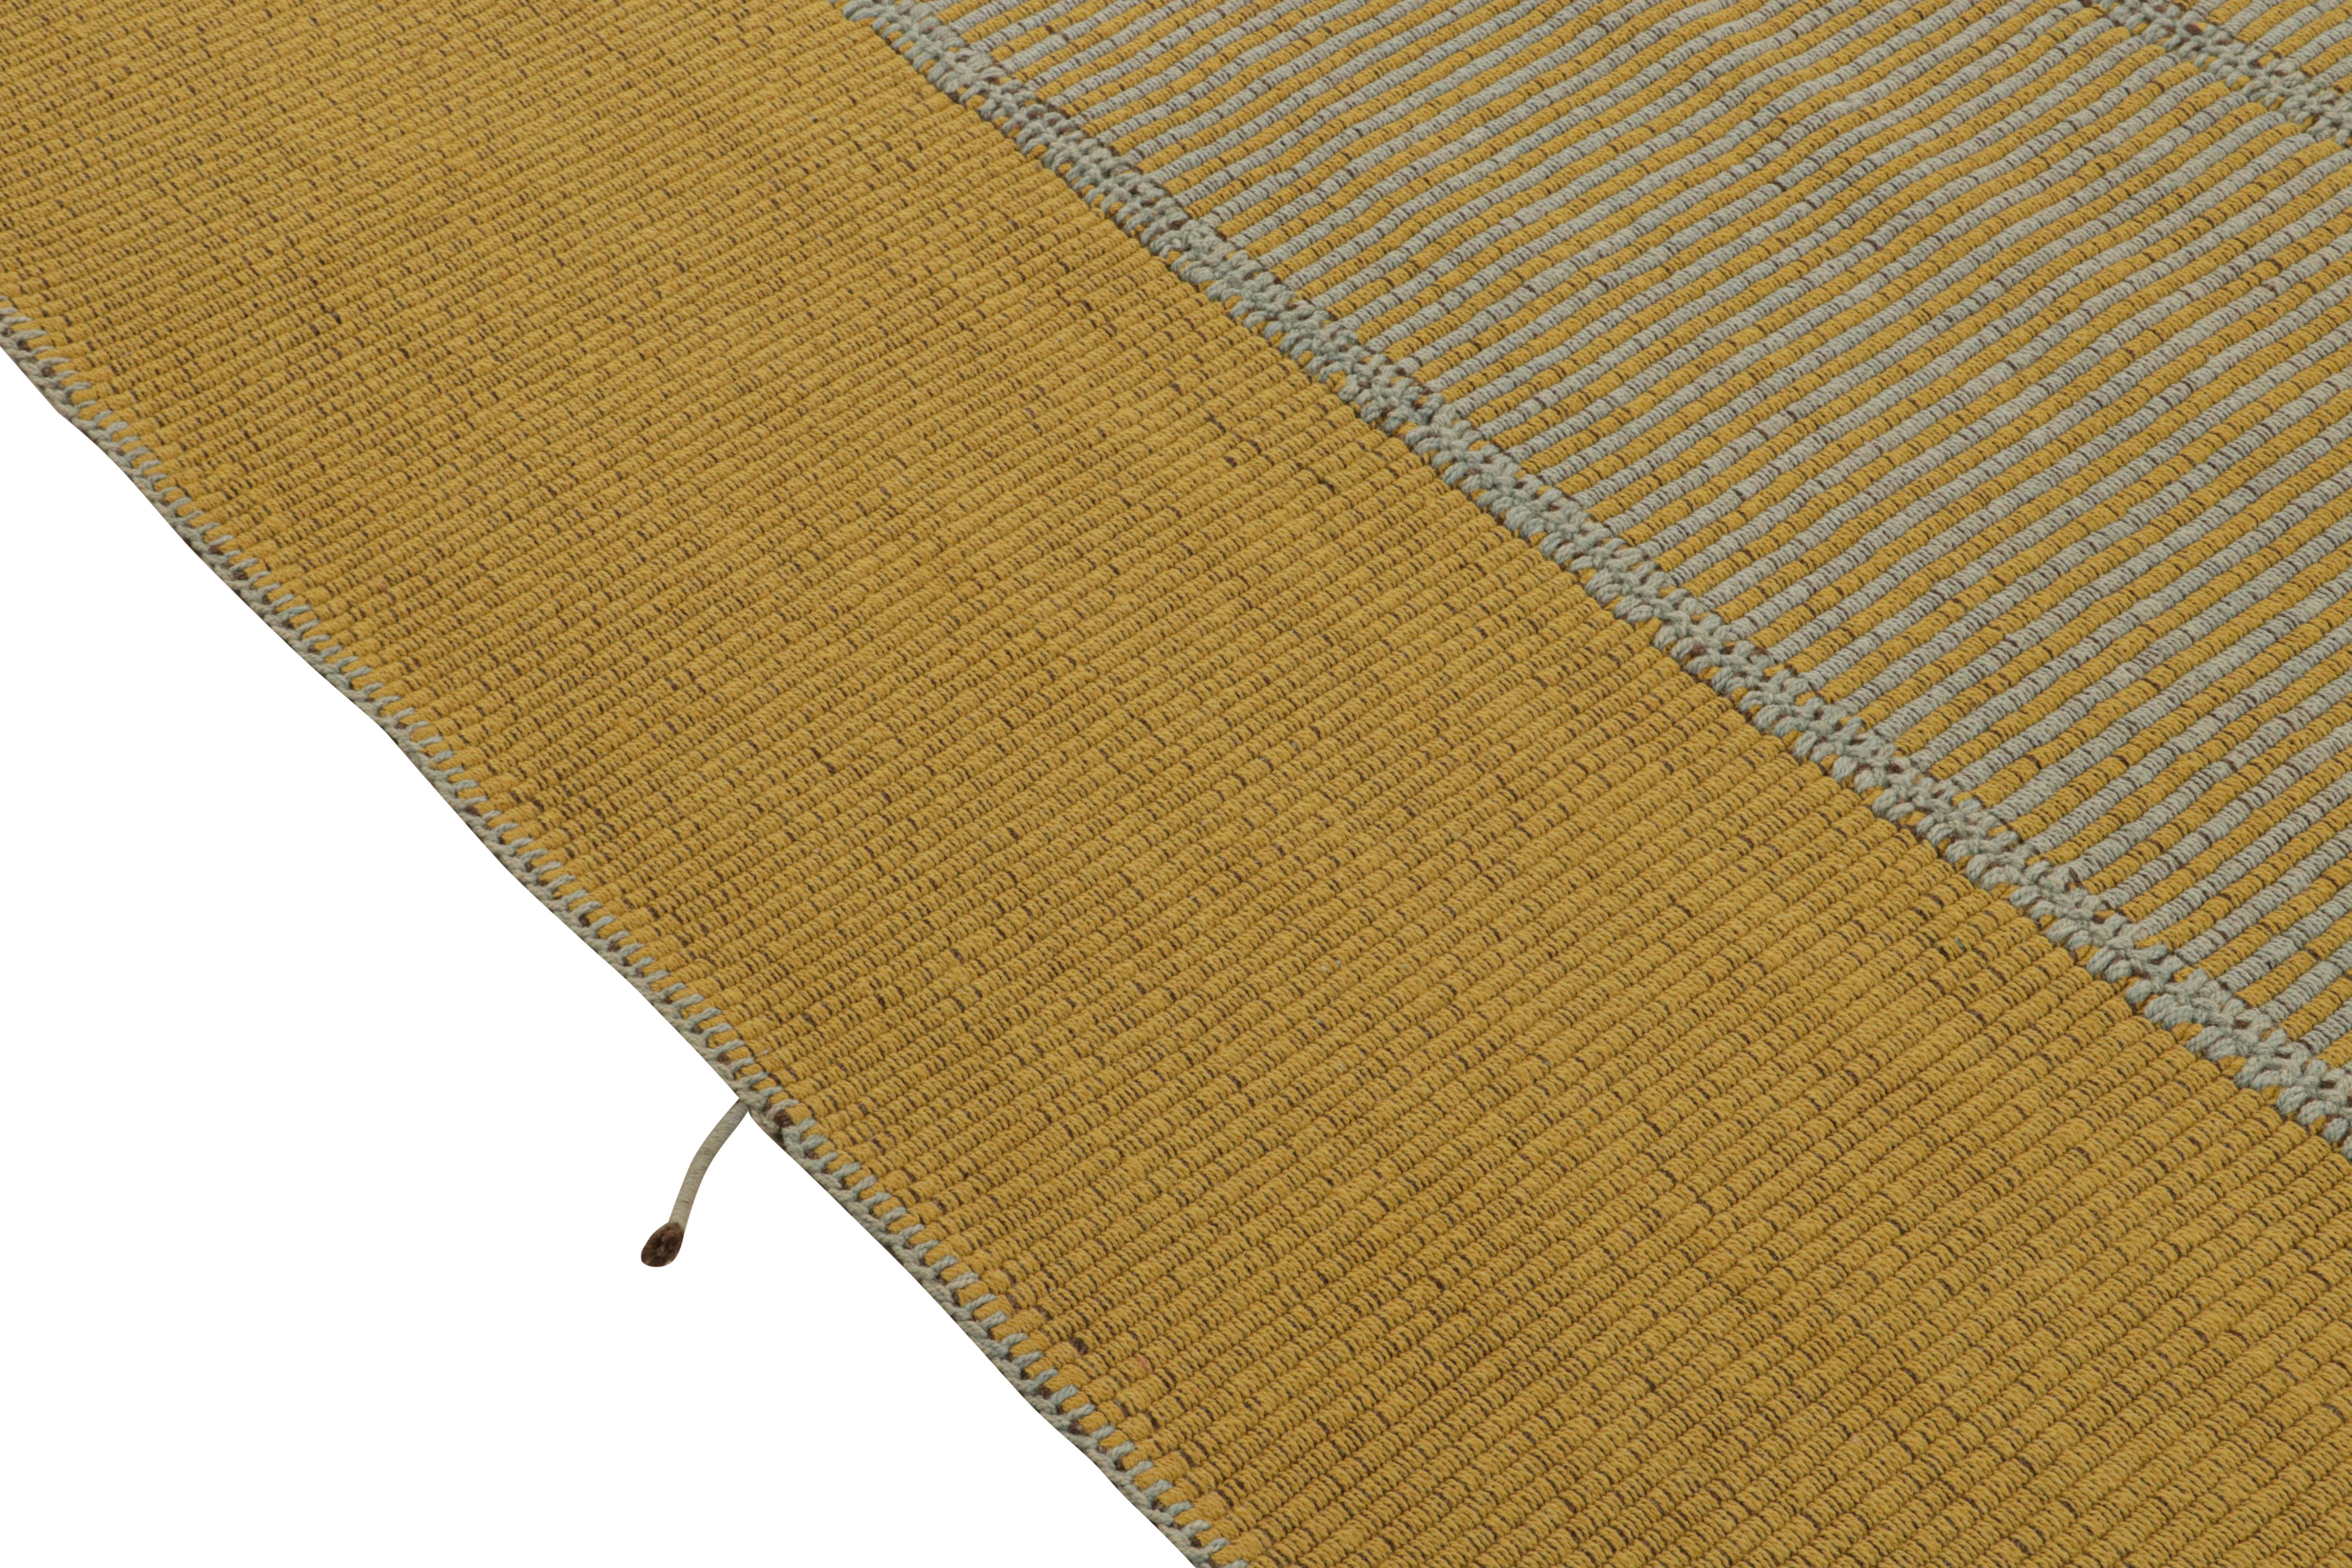 Rug & Kilim’s Contemporary Kilim in Gold and Blue Stripes In New Condition For Sale In Long Island City, NY